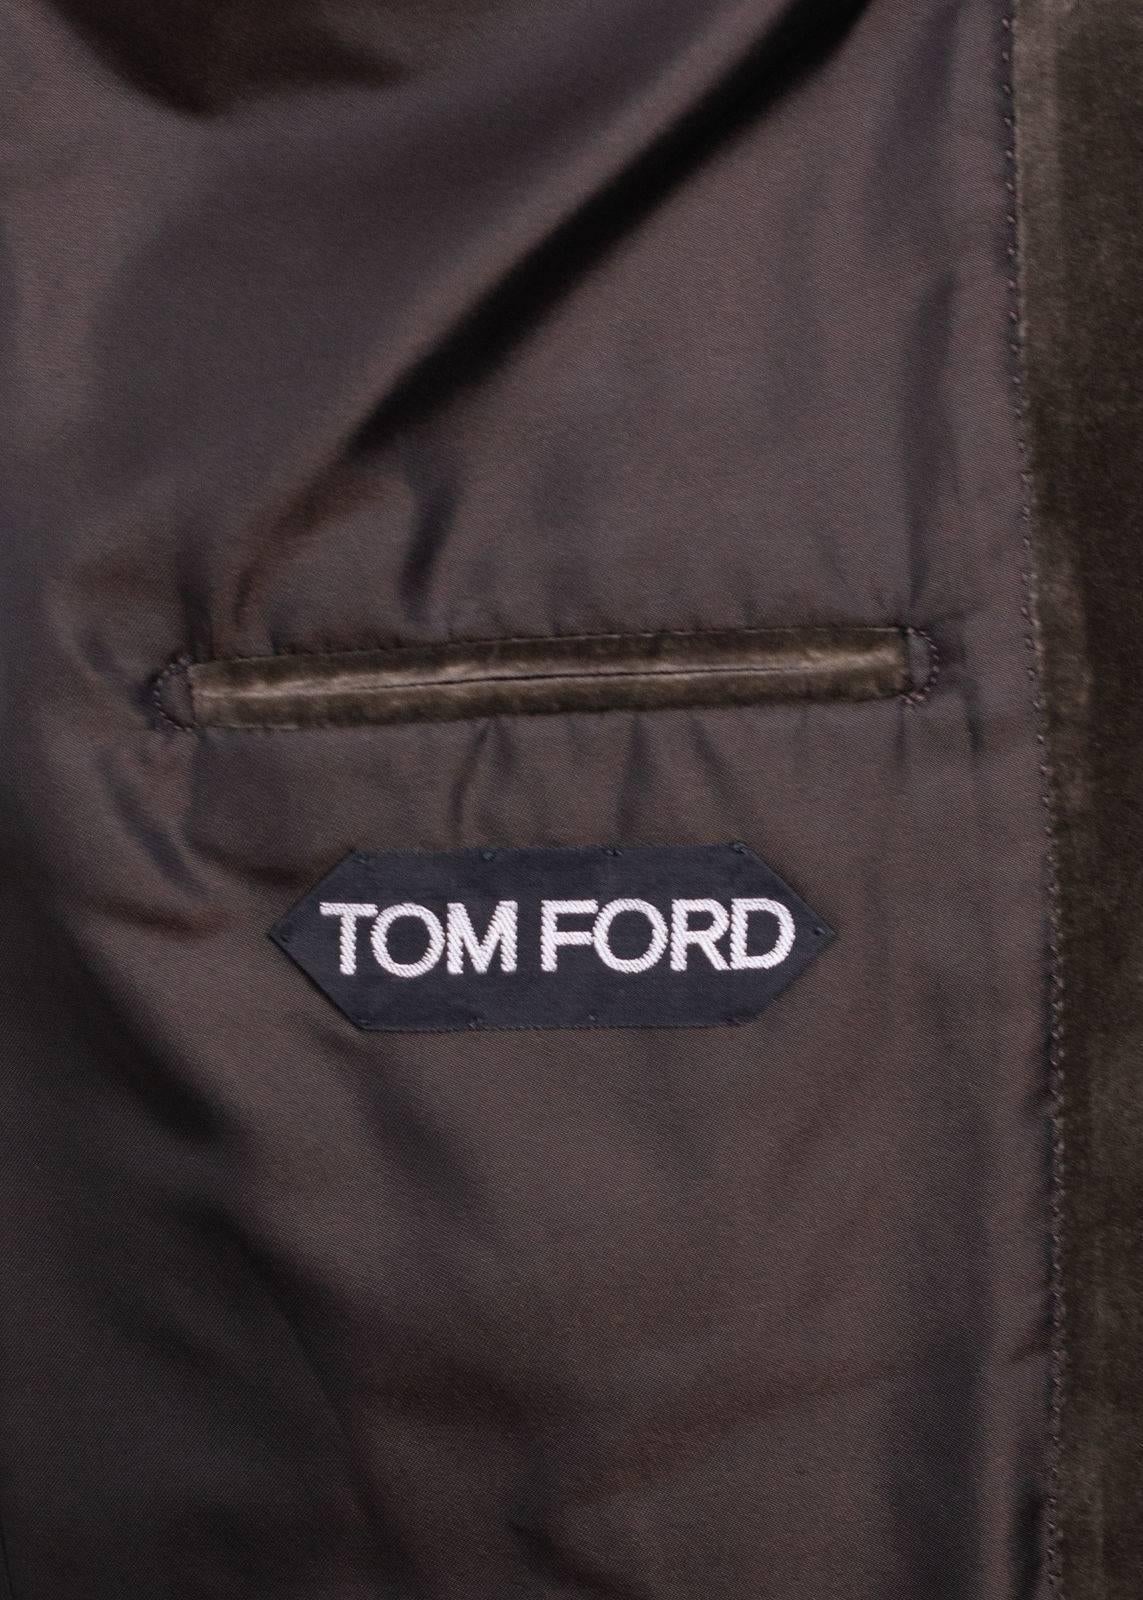 Tom Ford Brown Velvet Peak Lapel Shelton Sport Jacket Sz54R/44R RTL$3440 In Excellent Condition For Sale In Brooklyn, NY